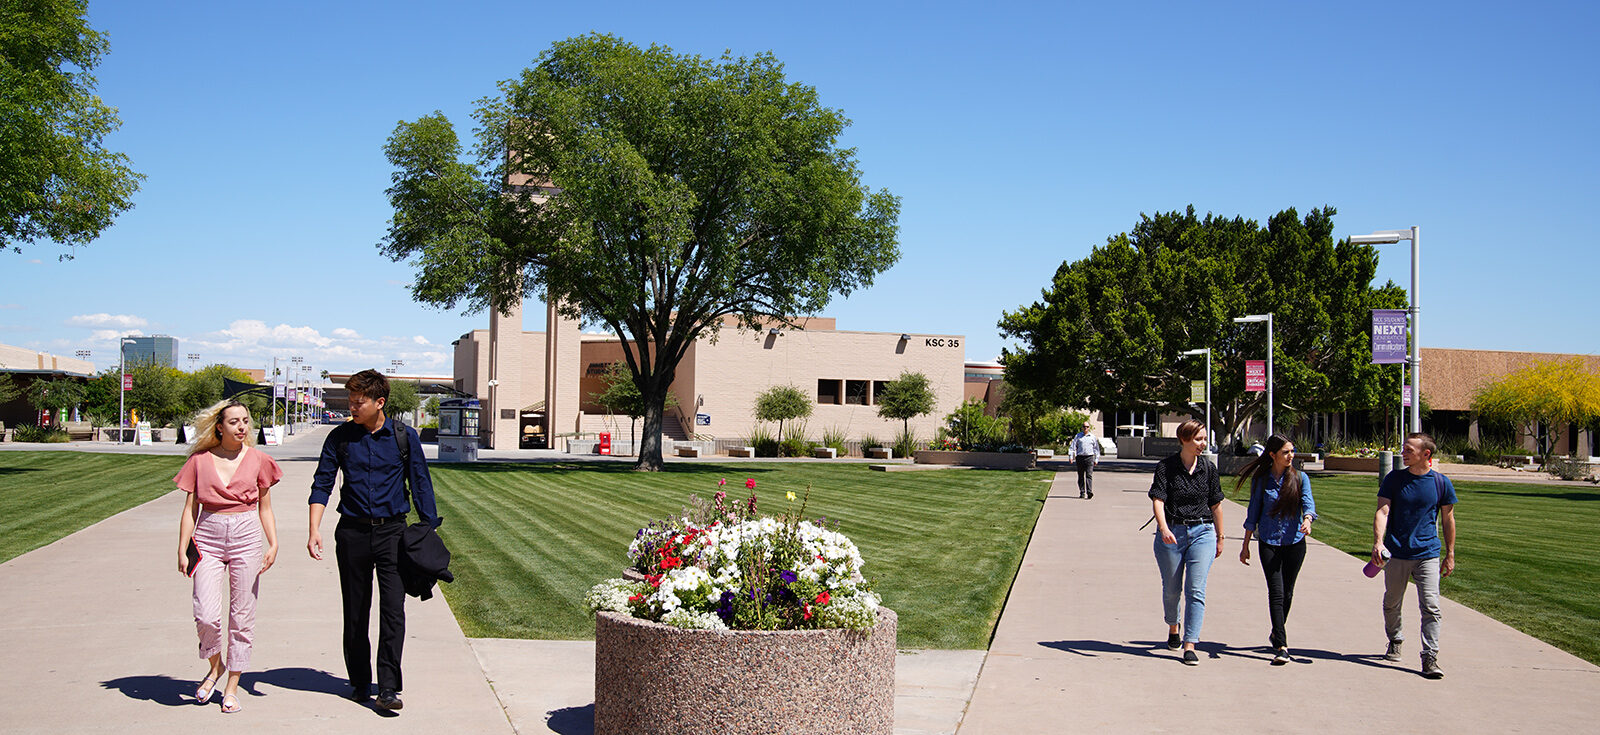 Students Walking On Mesa Community College Campus.